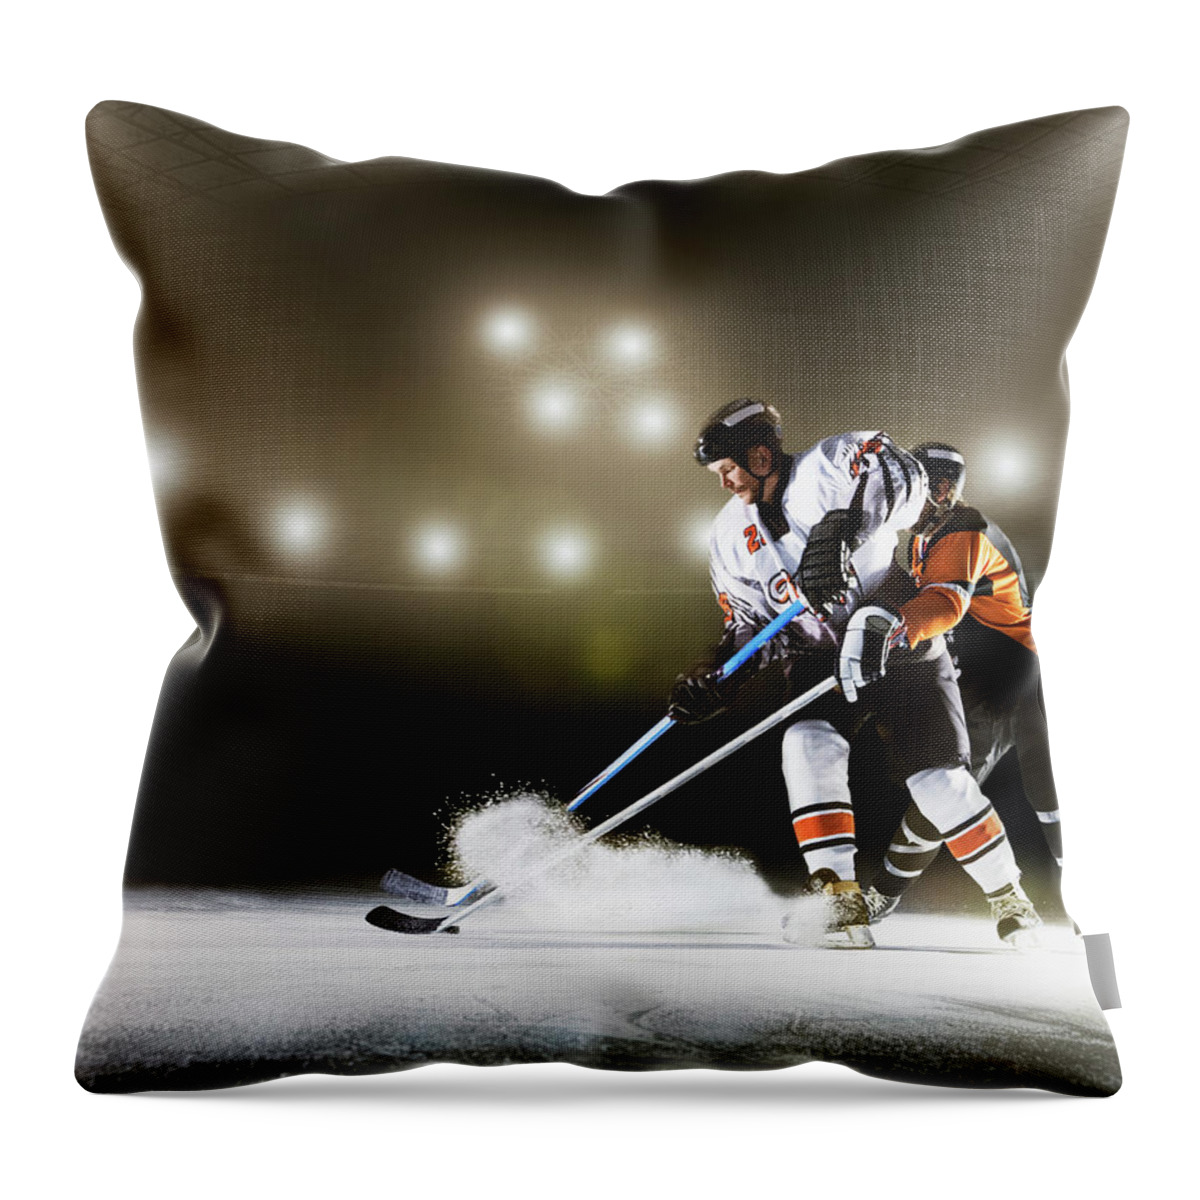 Two Ice Hockey Players Competing For Throw Pillow by Robert Decelis Ltd 